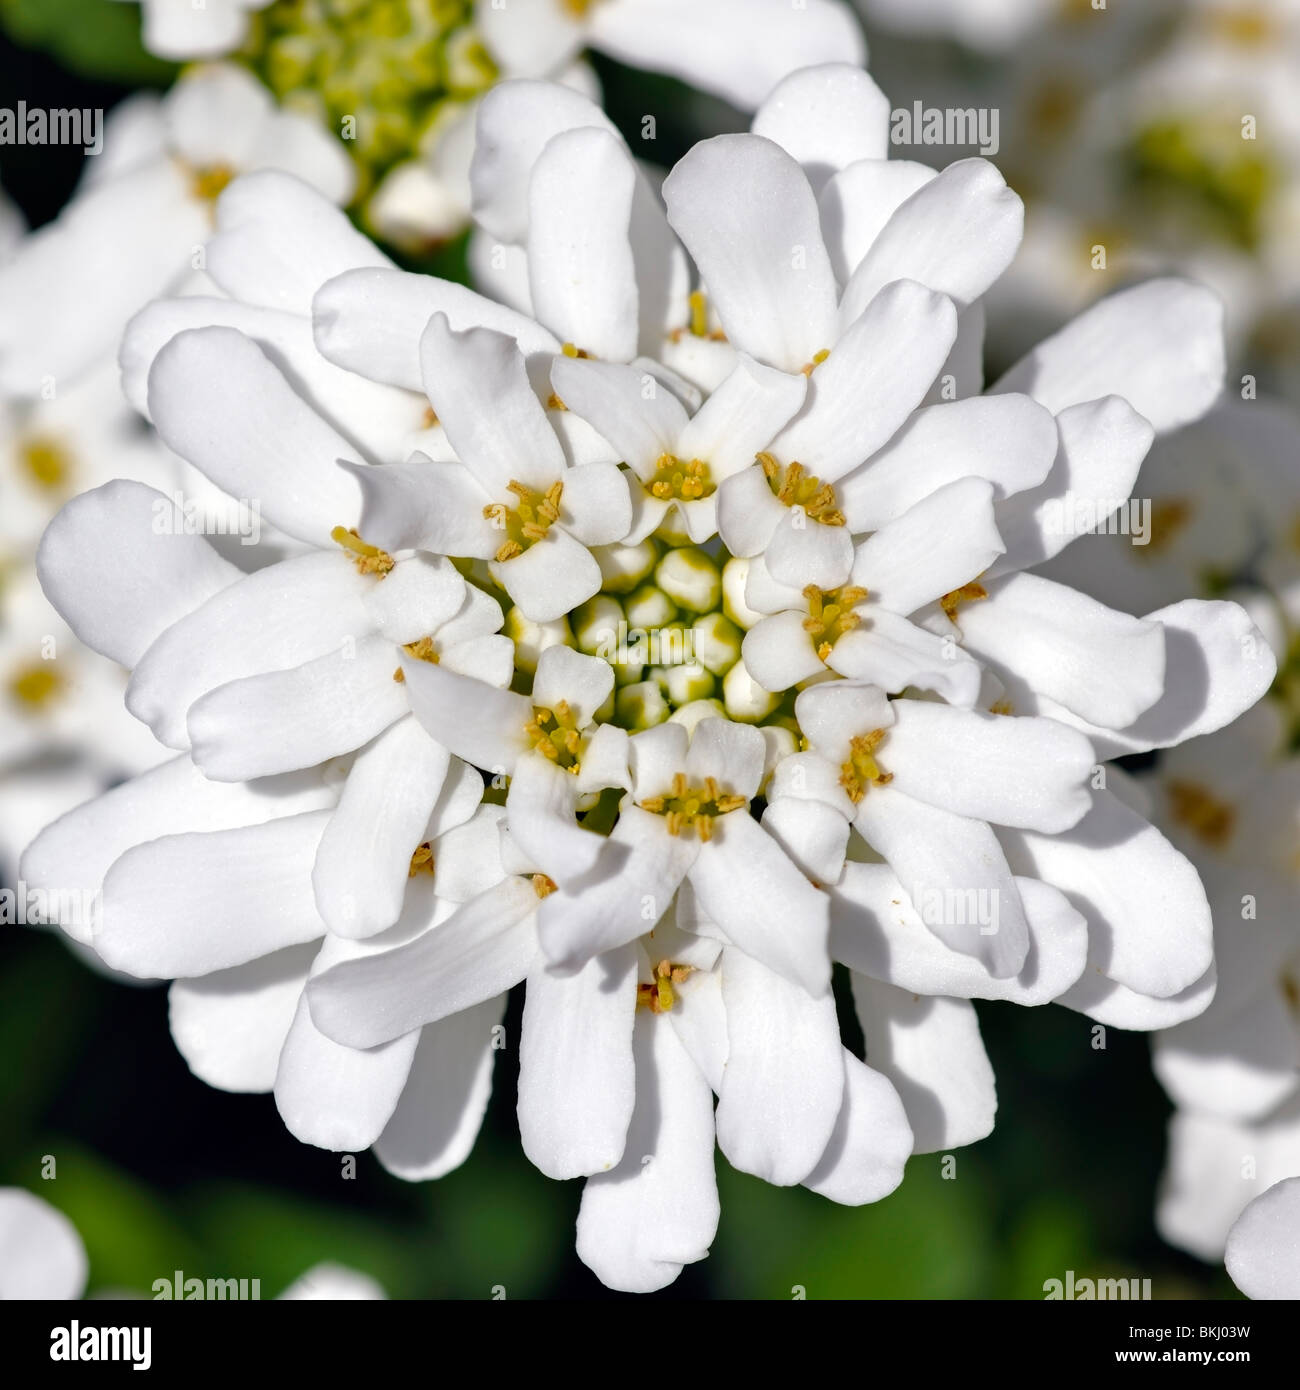 Corymb of Iberis sempervirens: profusion of pure white four-petaled flowers Stock Photo